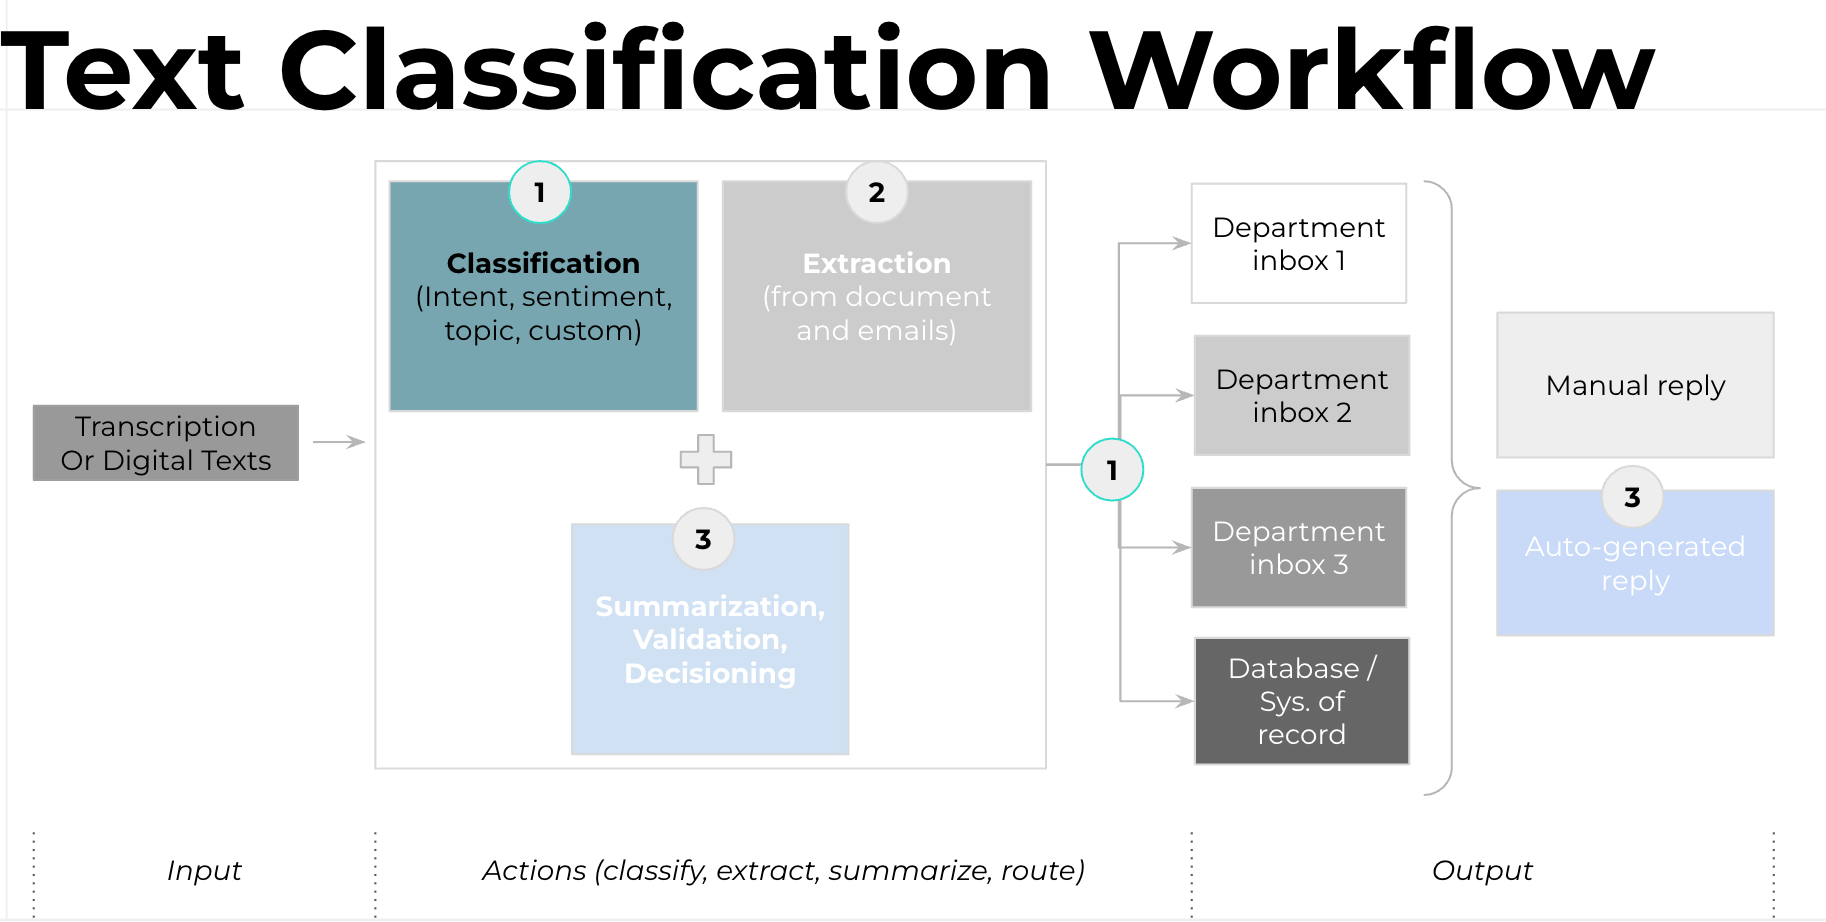 Text Classification workflow